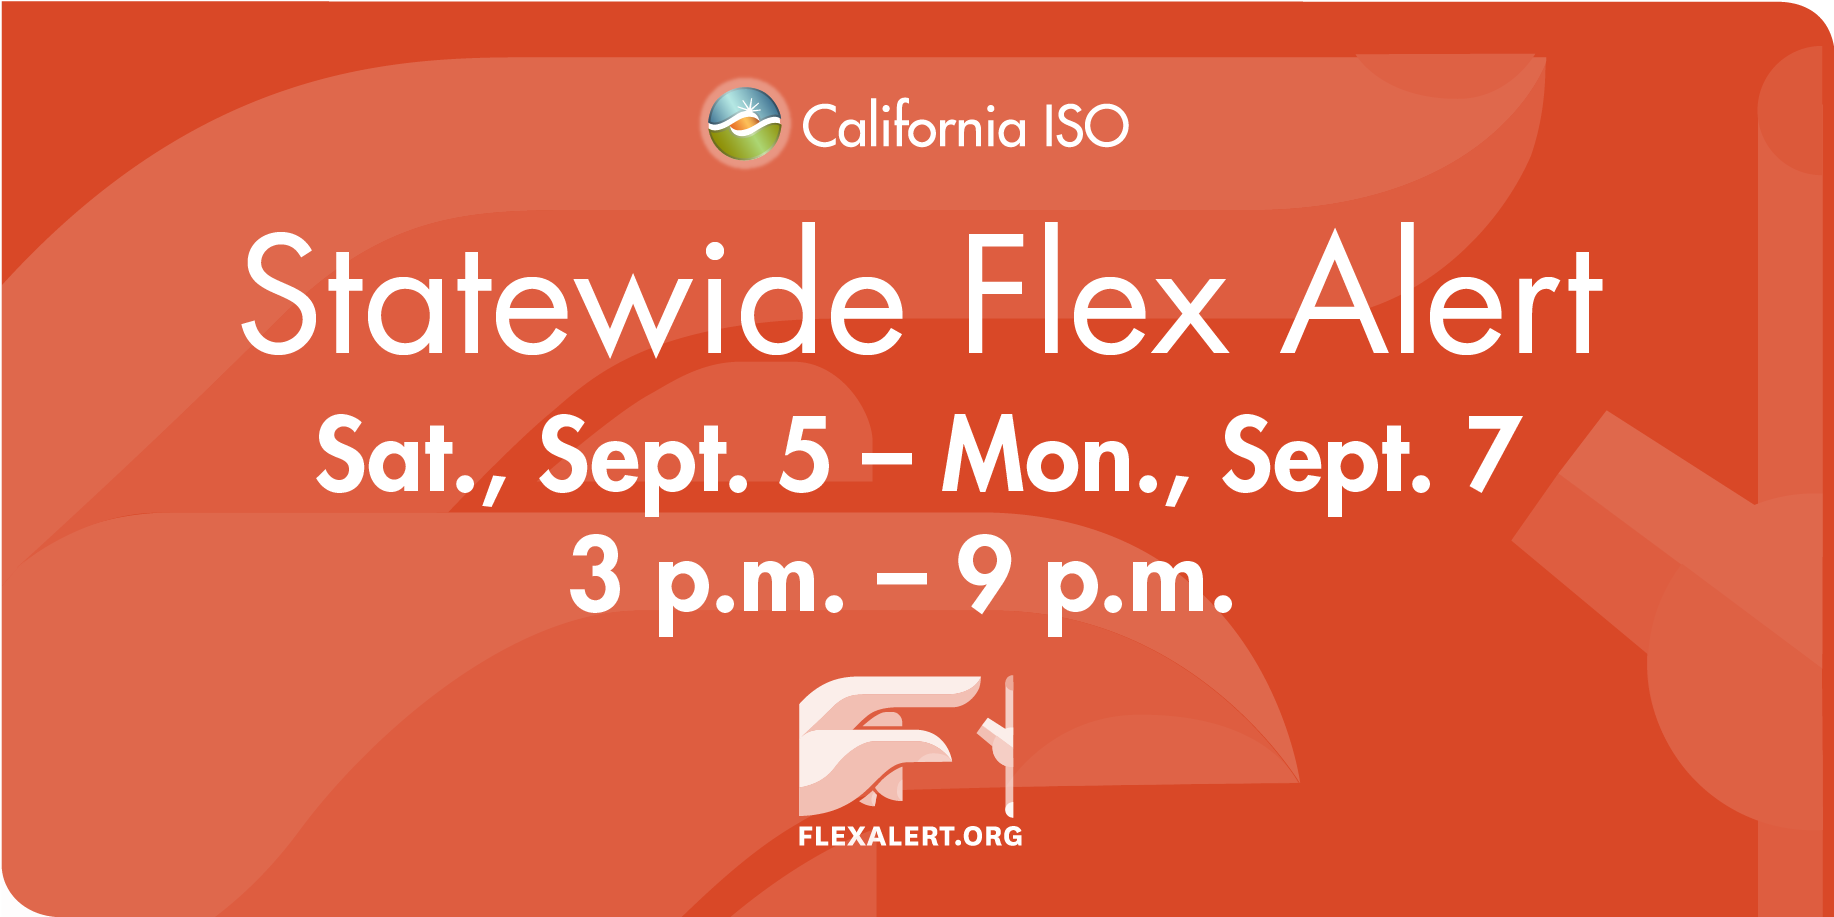 Flex Alert Issued For Holiday Weekend, Calling For Energy Conservation